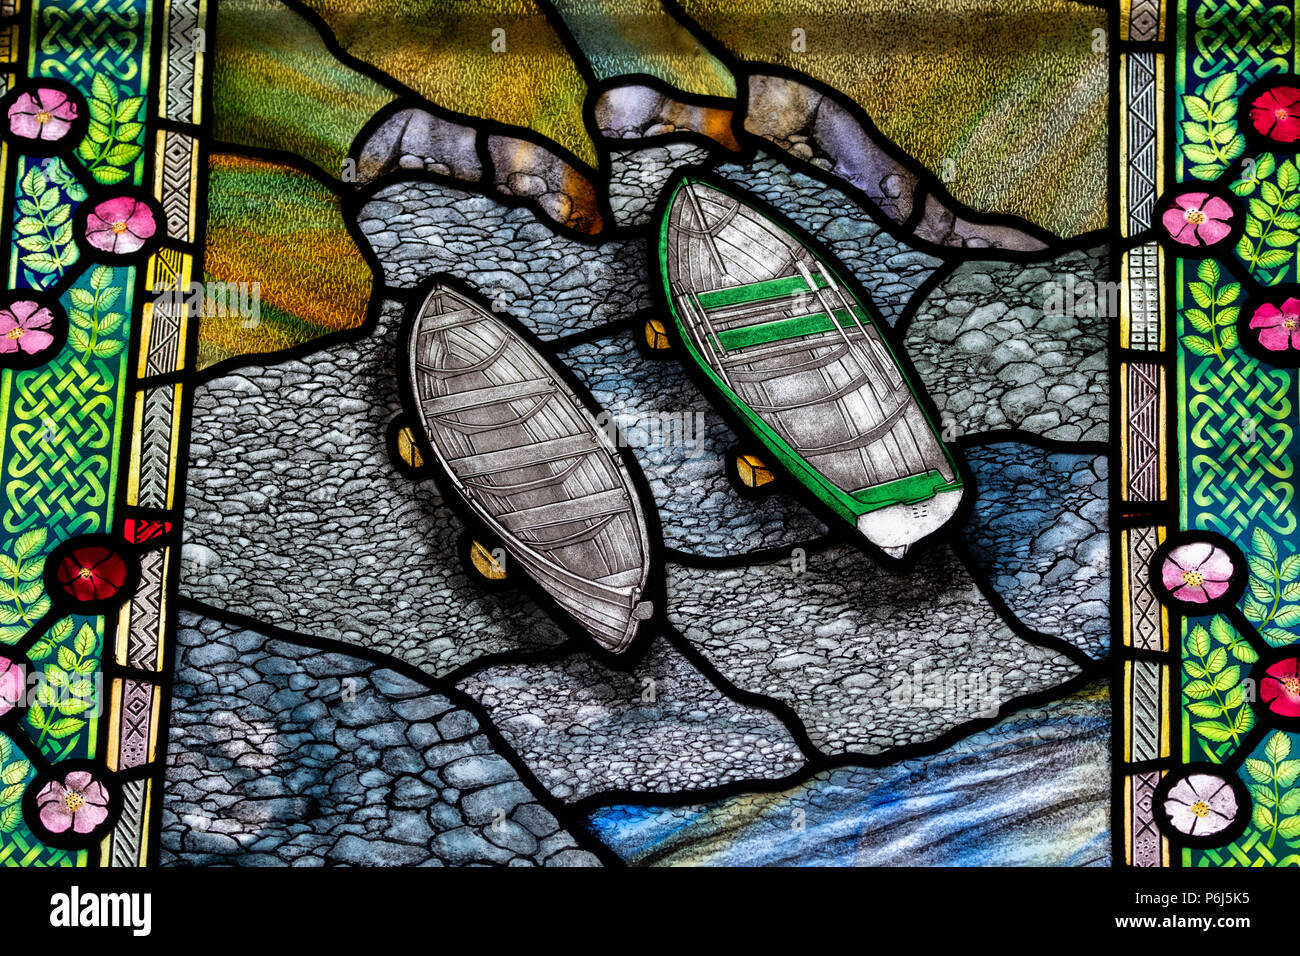 Great Britain, Shetland, Fair Isle. Church of Scotland Kirk, stained glass window. Window detail with scenic coastline and boats. Stock Photo